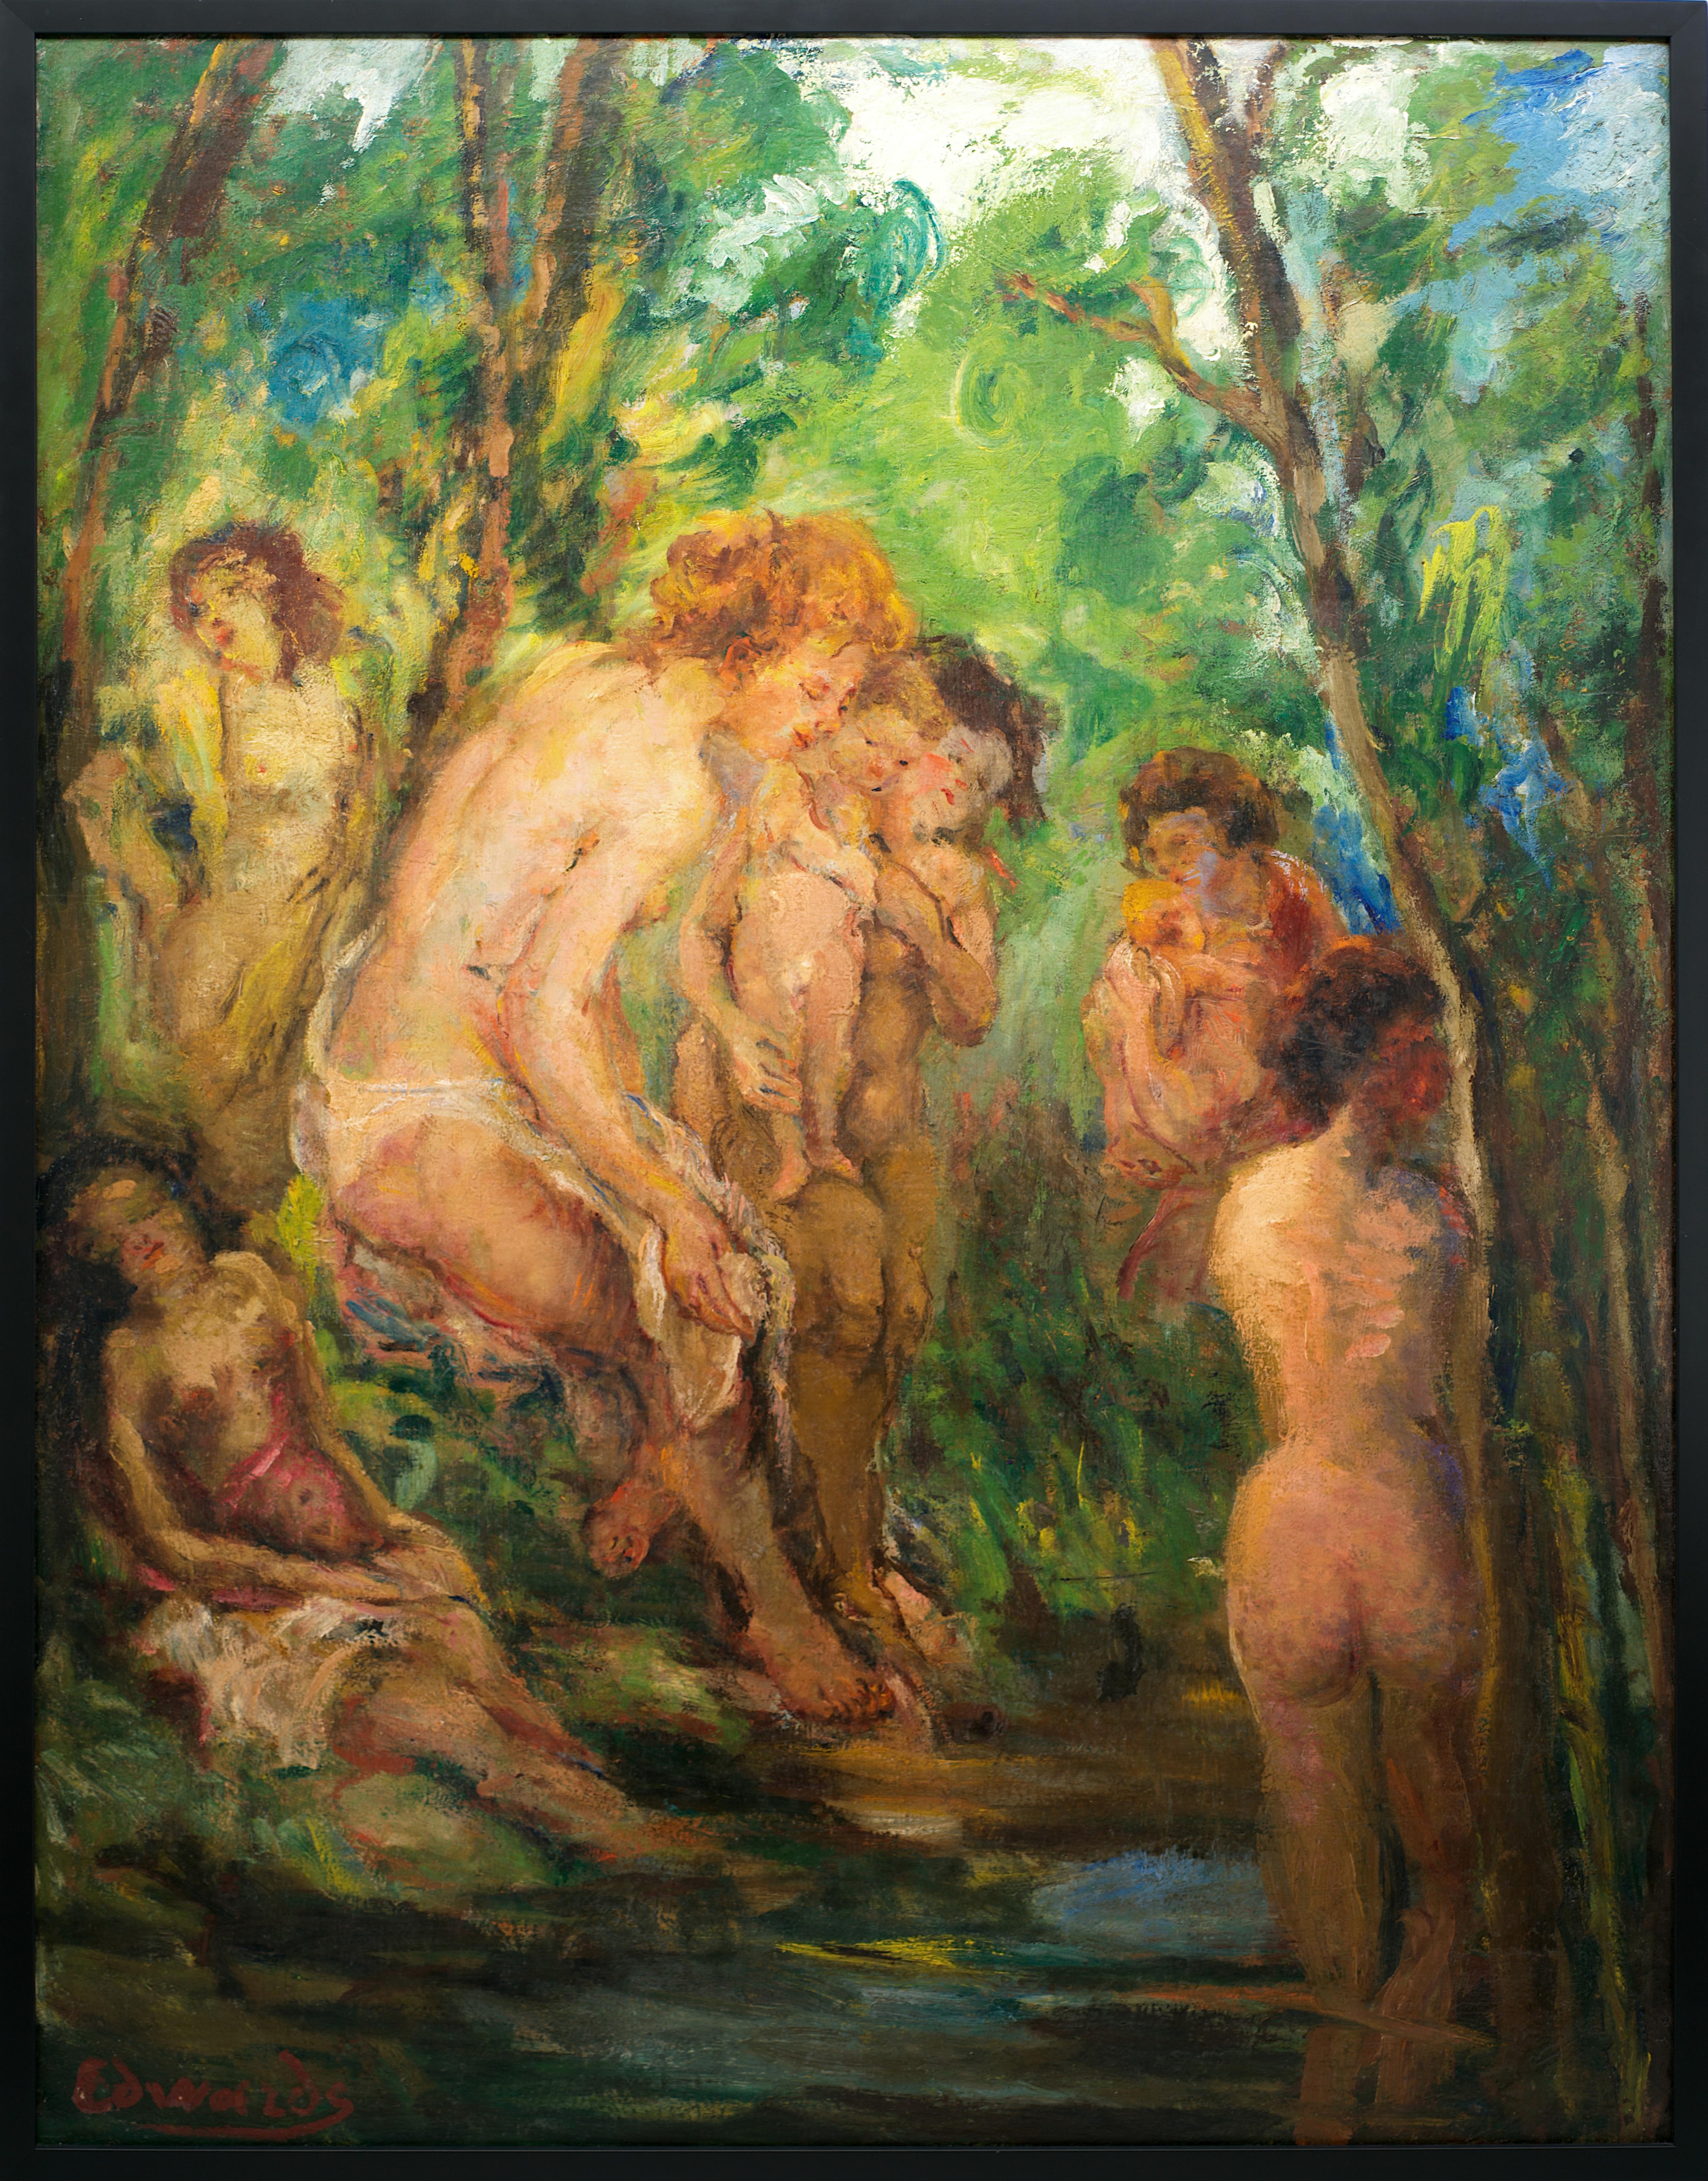 Large oil on canvas by Fernande Horovitz-Edwards, France, 1930s. "Bathers". With frame: 117,5x90x4 cm - 46.3x35.4x1.6 inches. Without frame: 114x87 cm - 44.9x34.25 inches. Signed lower left "Edwards". The canvas rolled originally given its